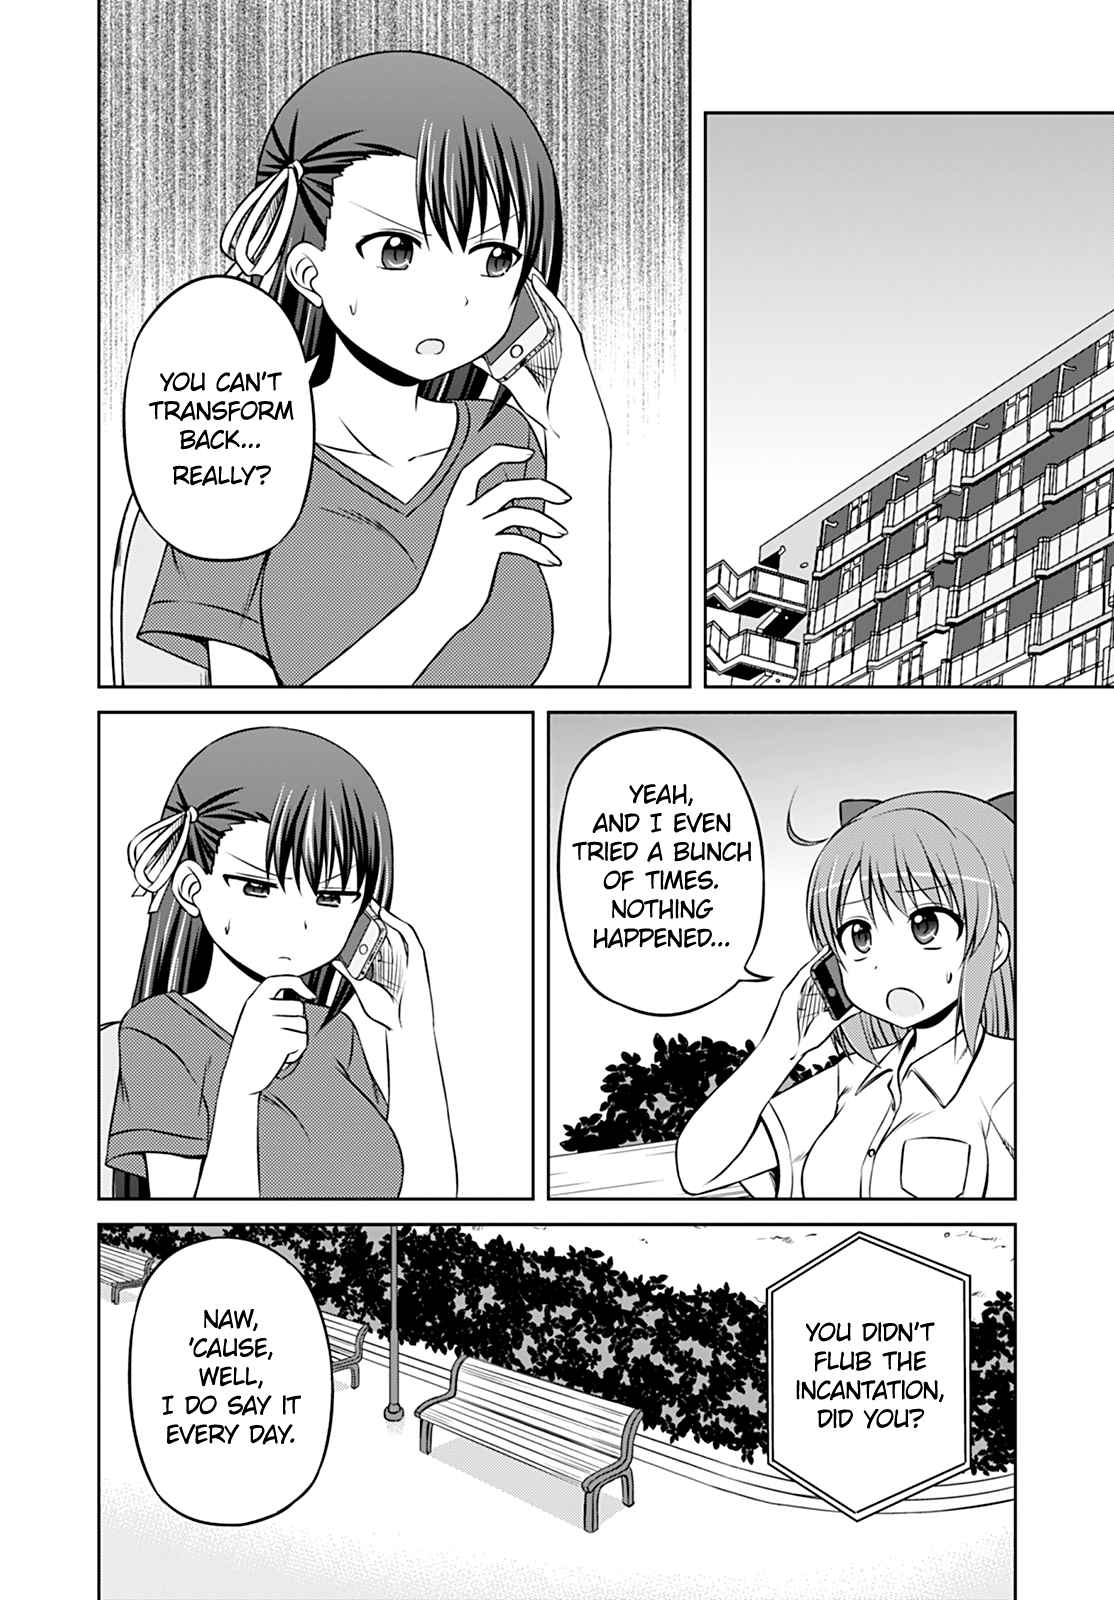 Magical Trans! Vol. 2 Ch. 21 Anxiety and Impatience